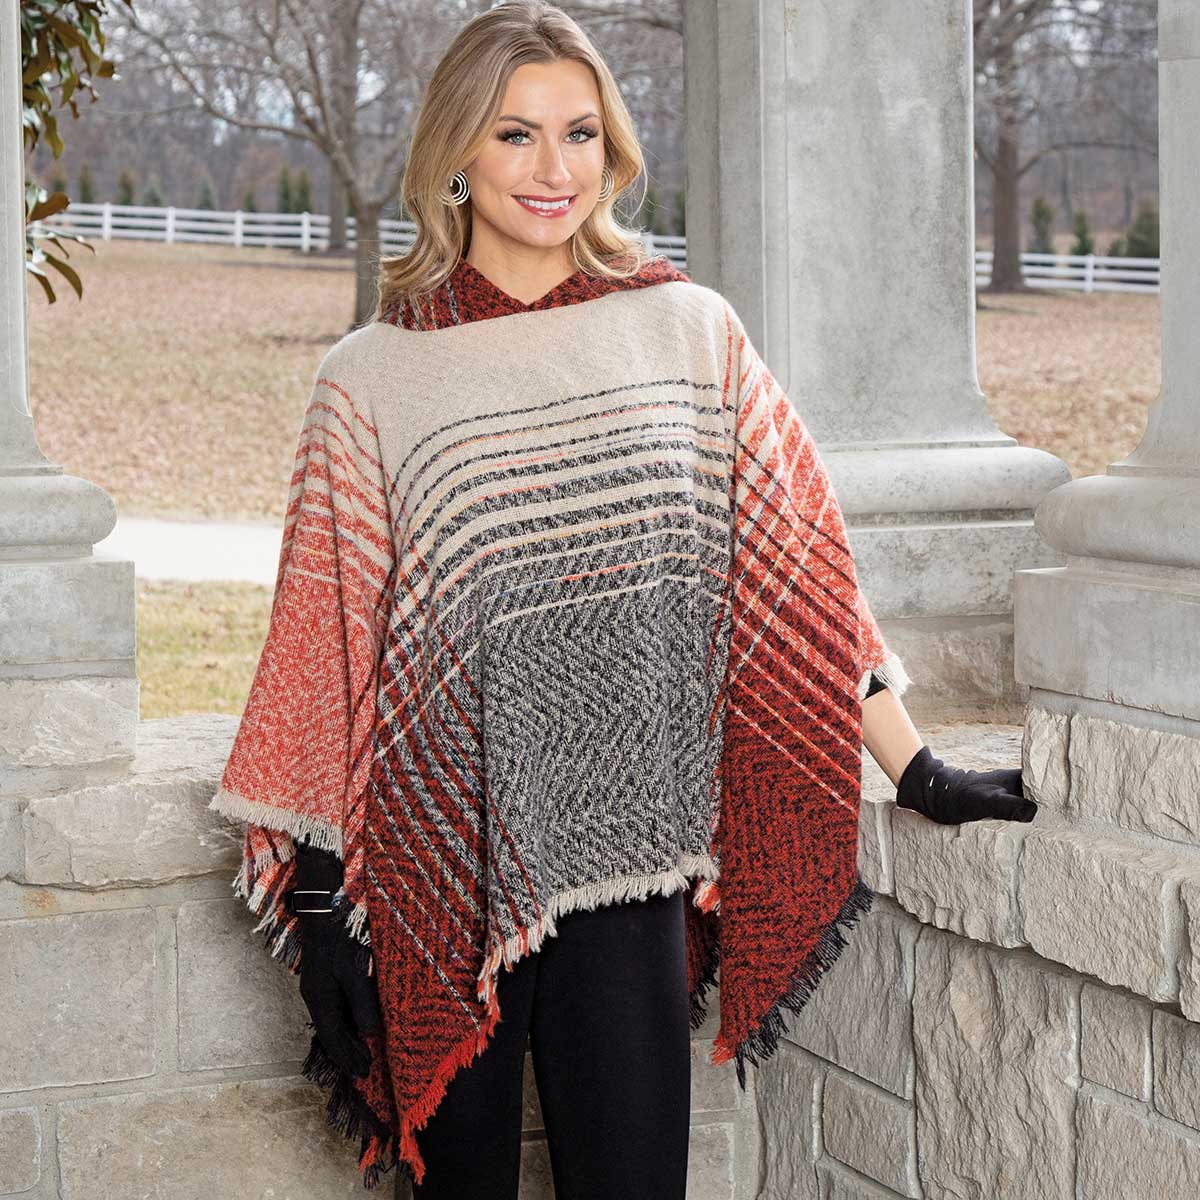 Red and Cream Knit Poncho with Hood 53"x27"